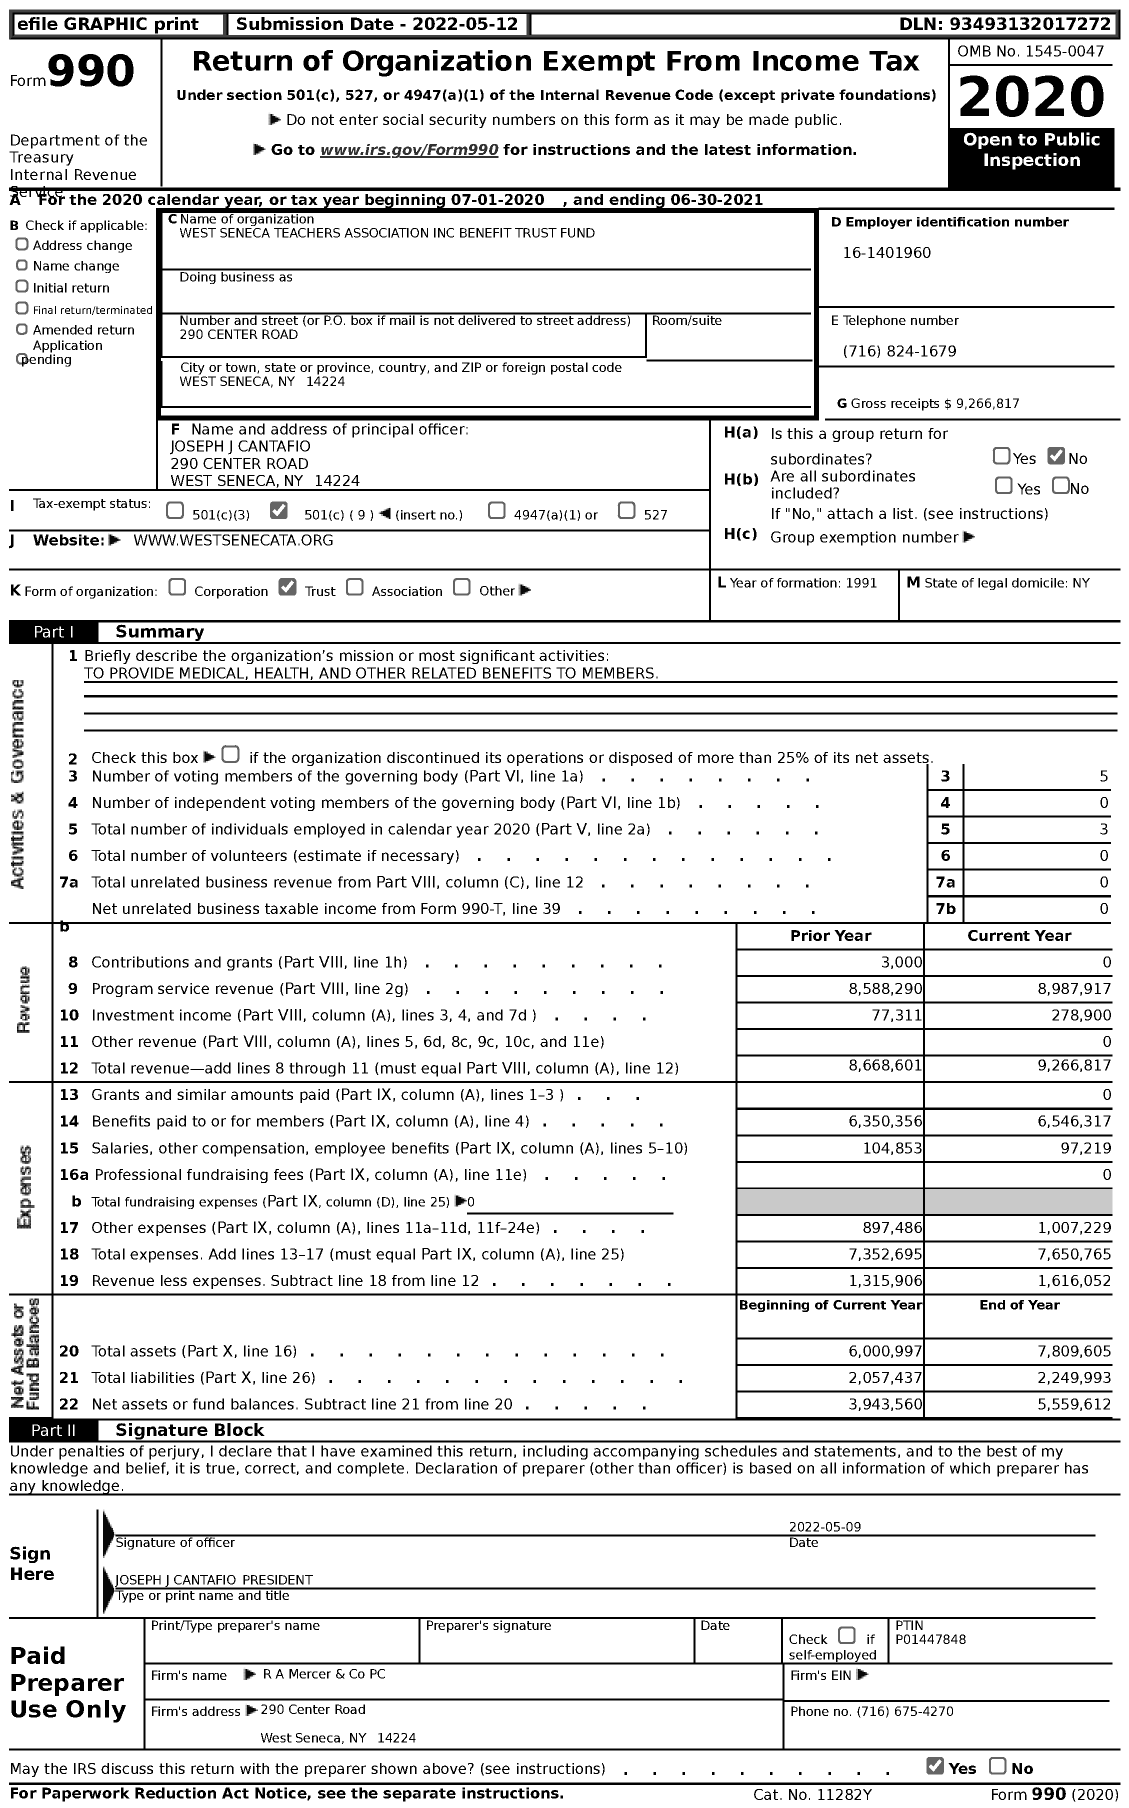 Image of first page of 2020 Form 990 for West Seneca Teachers Association Benefit Trust Fund